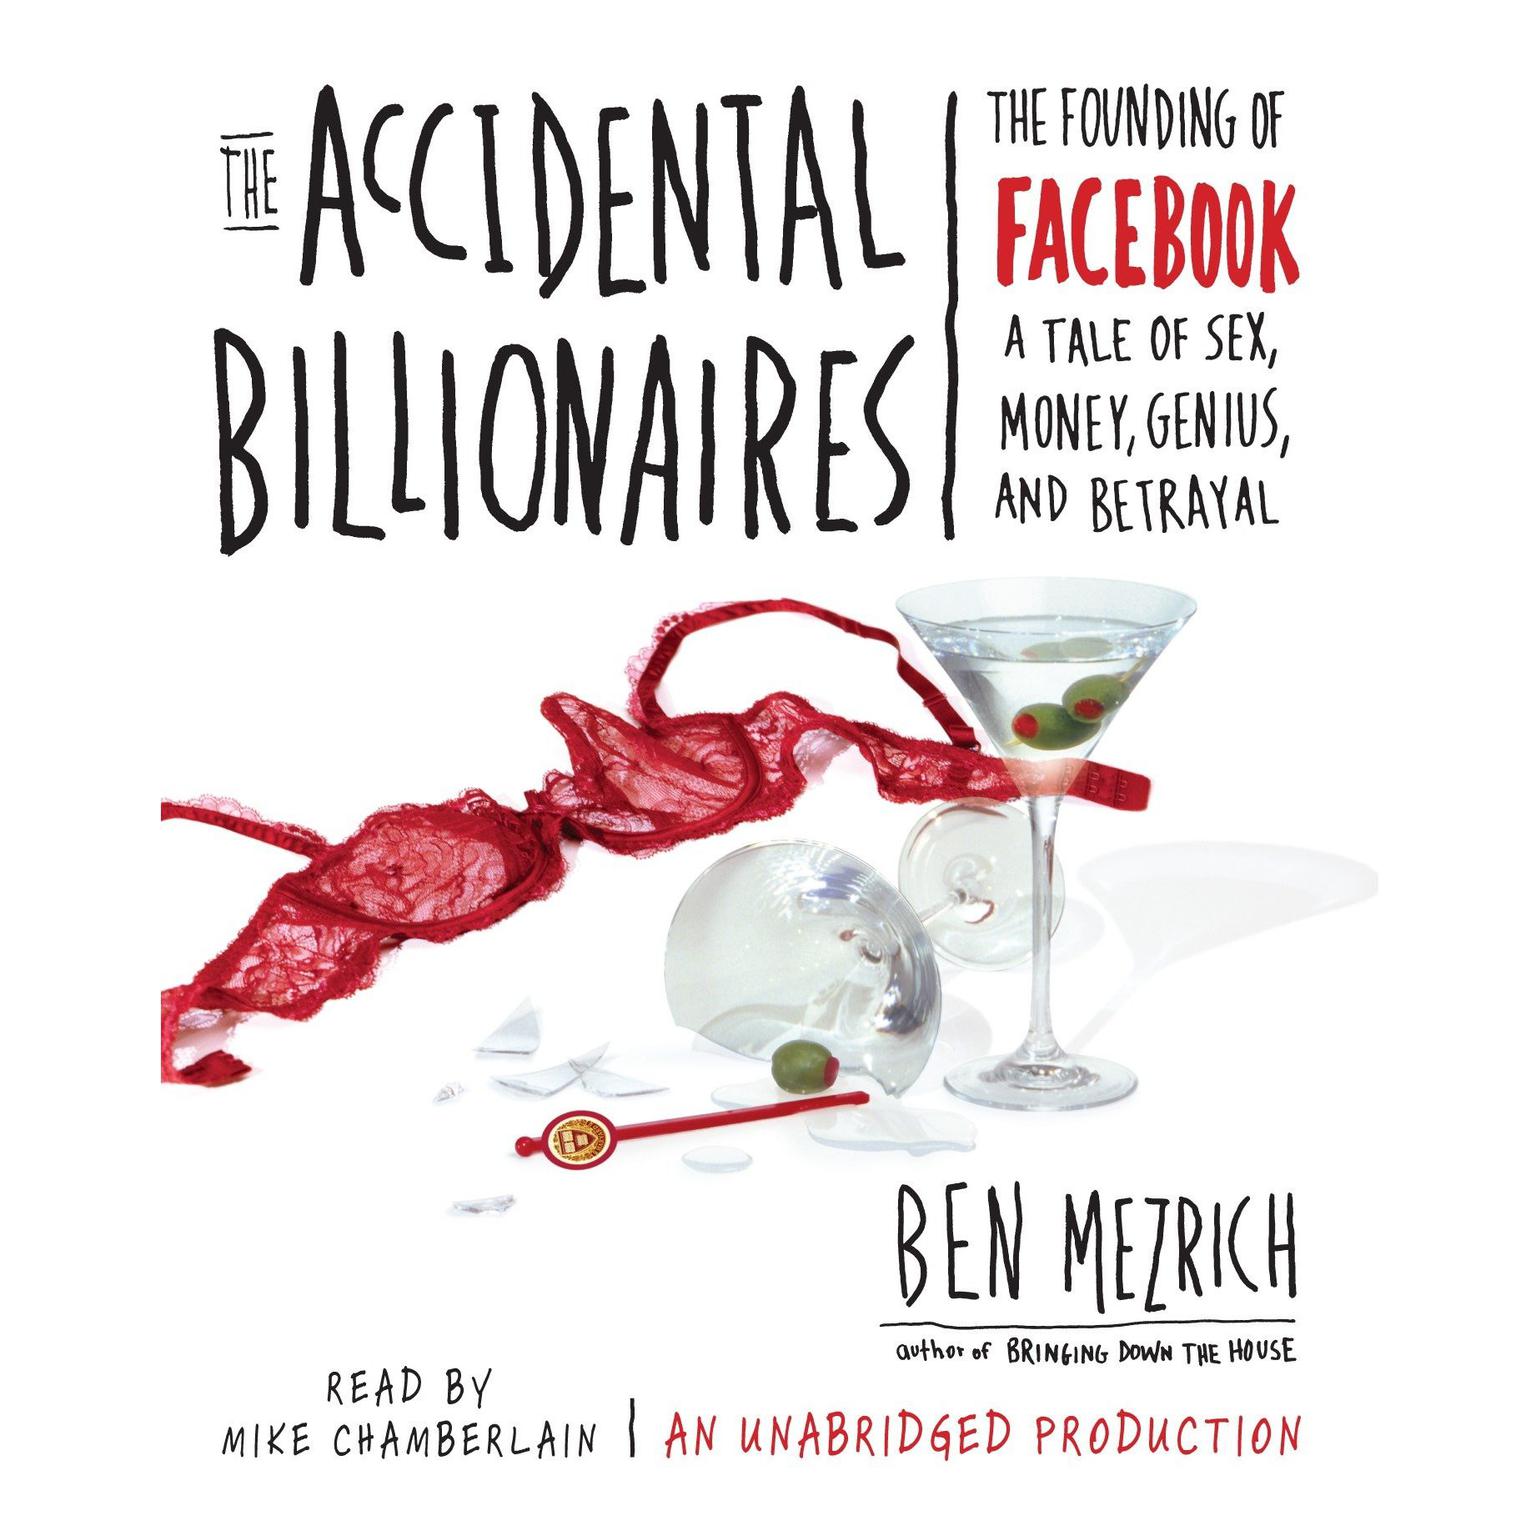 The Accidental Billionaires: The Founding of Facebook: A Tale of Sex, Money, Genius and Betrayal Audiobook, by Ben Mezrich